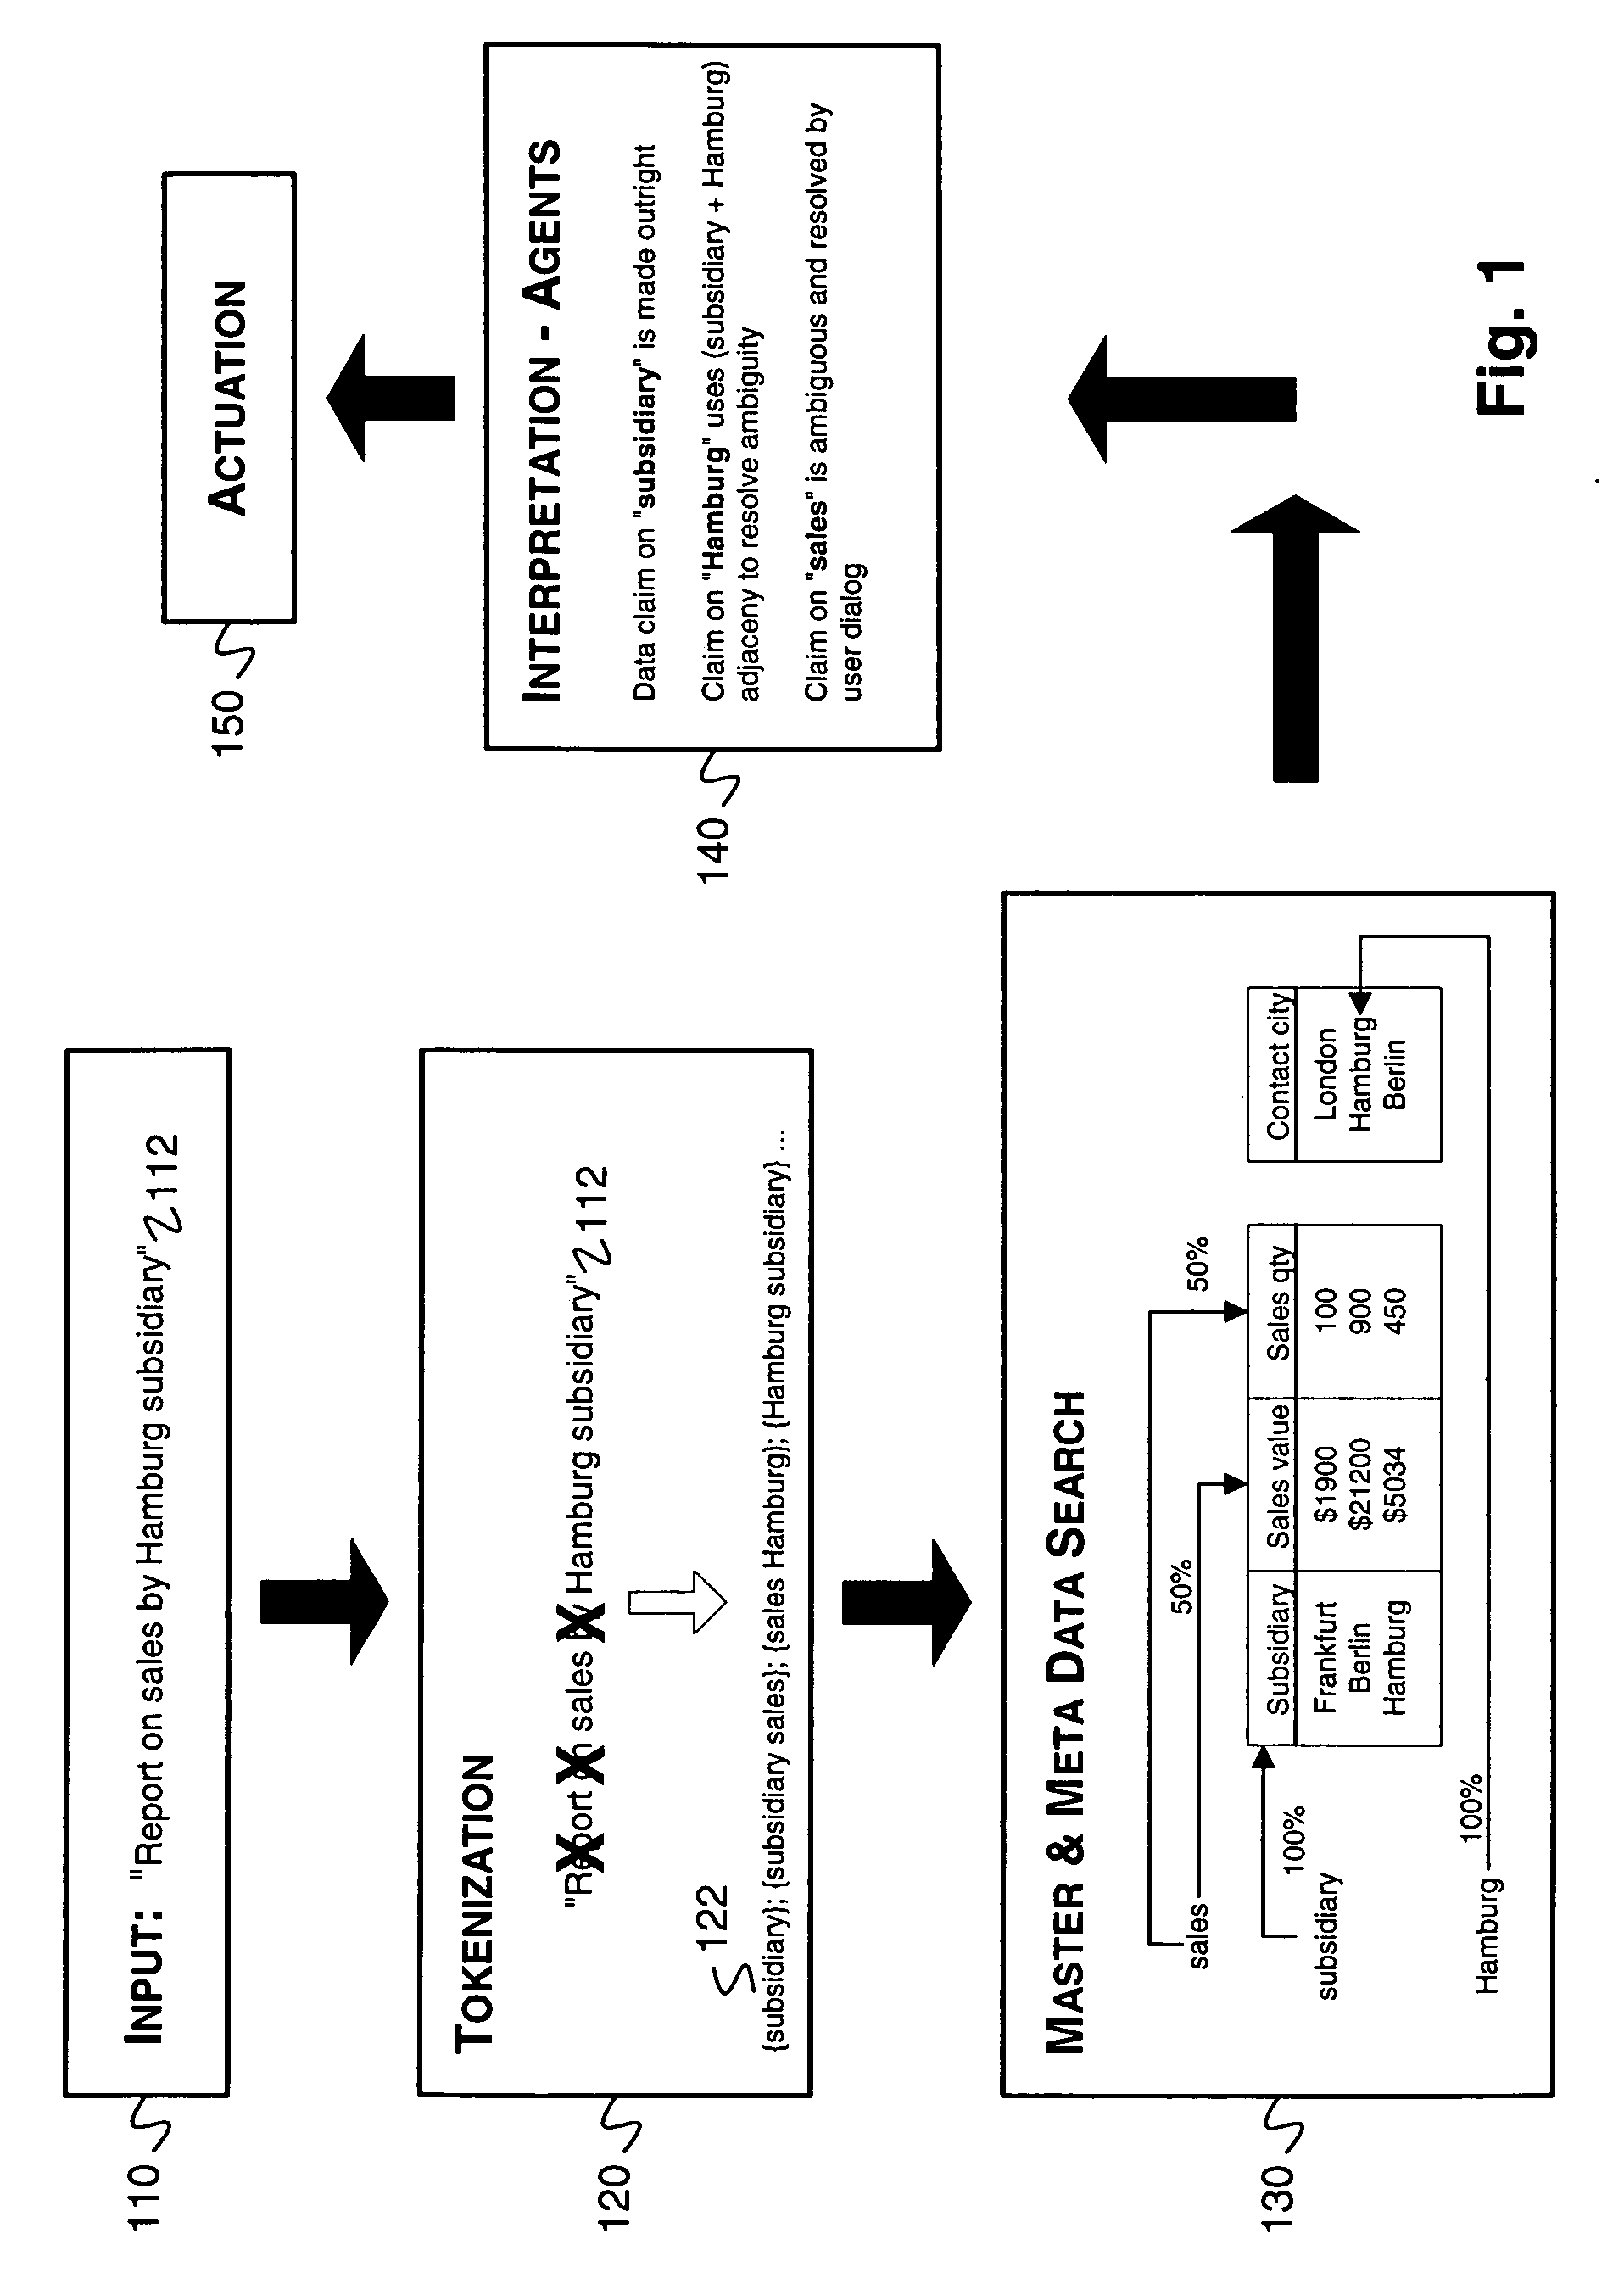 Systems and methods for processing natural language queries